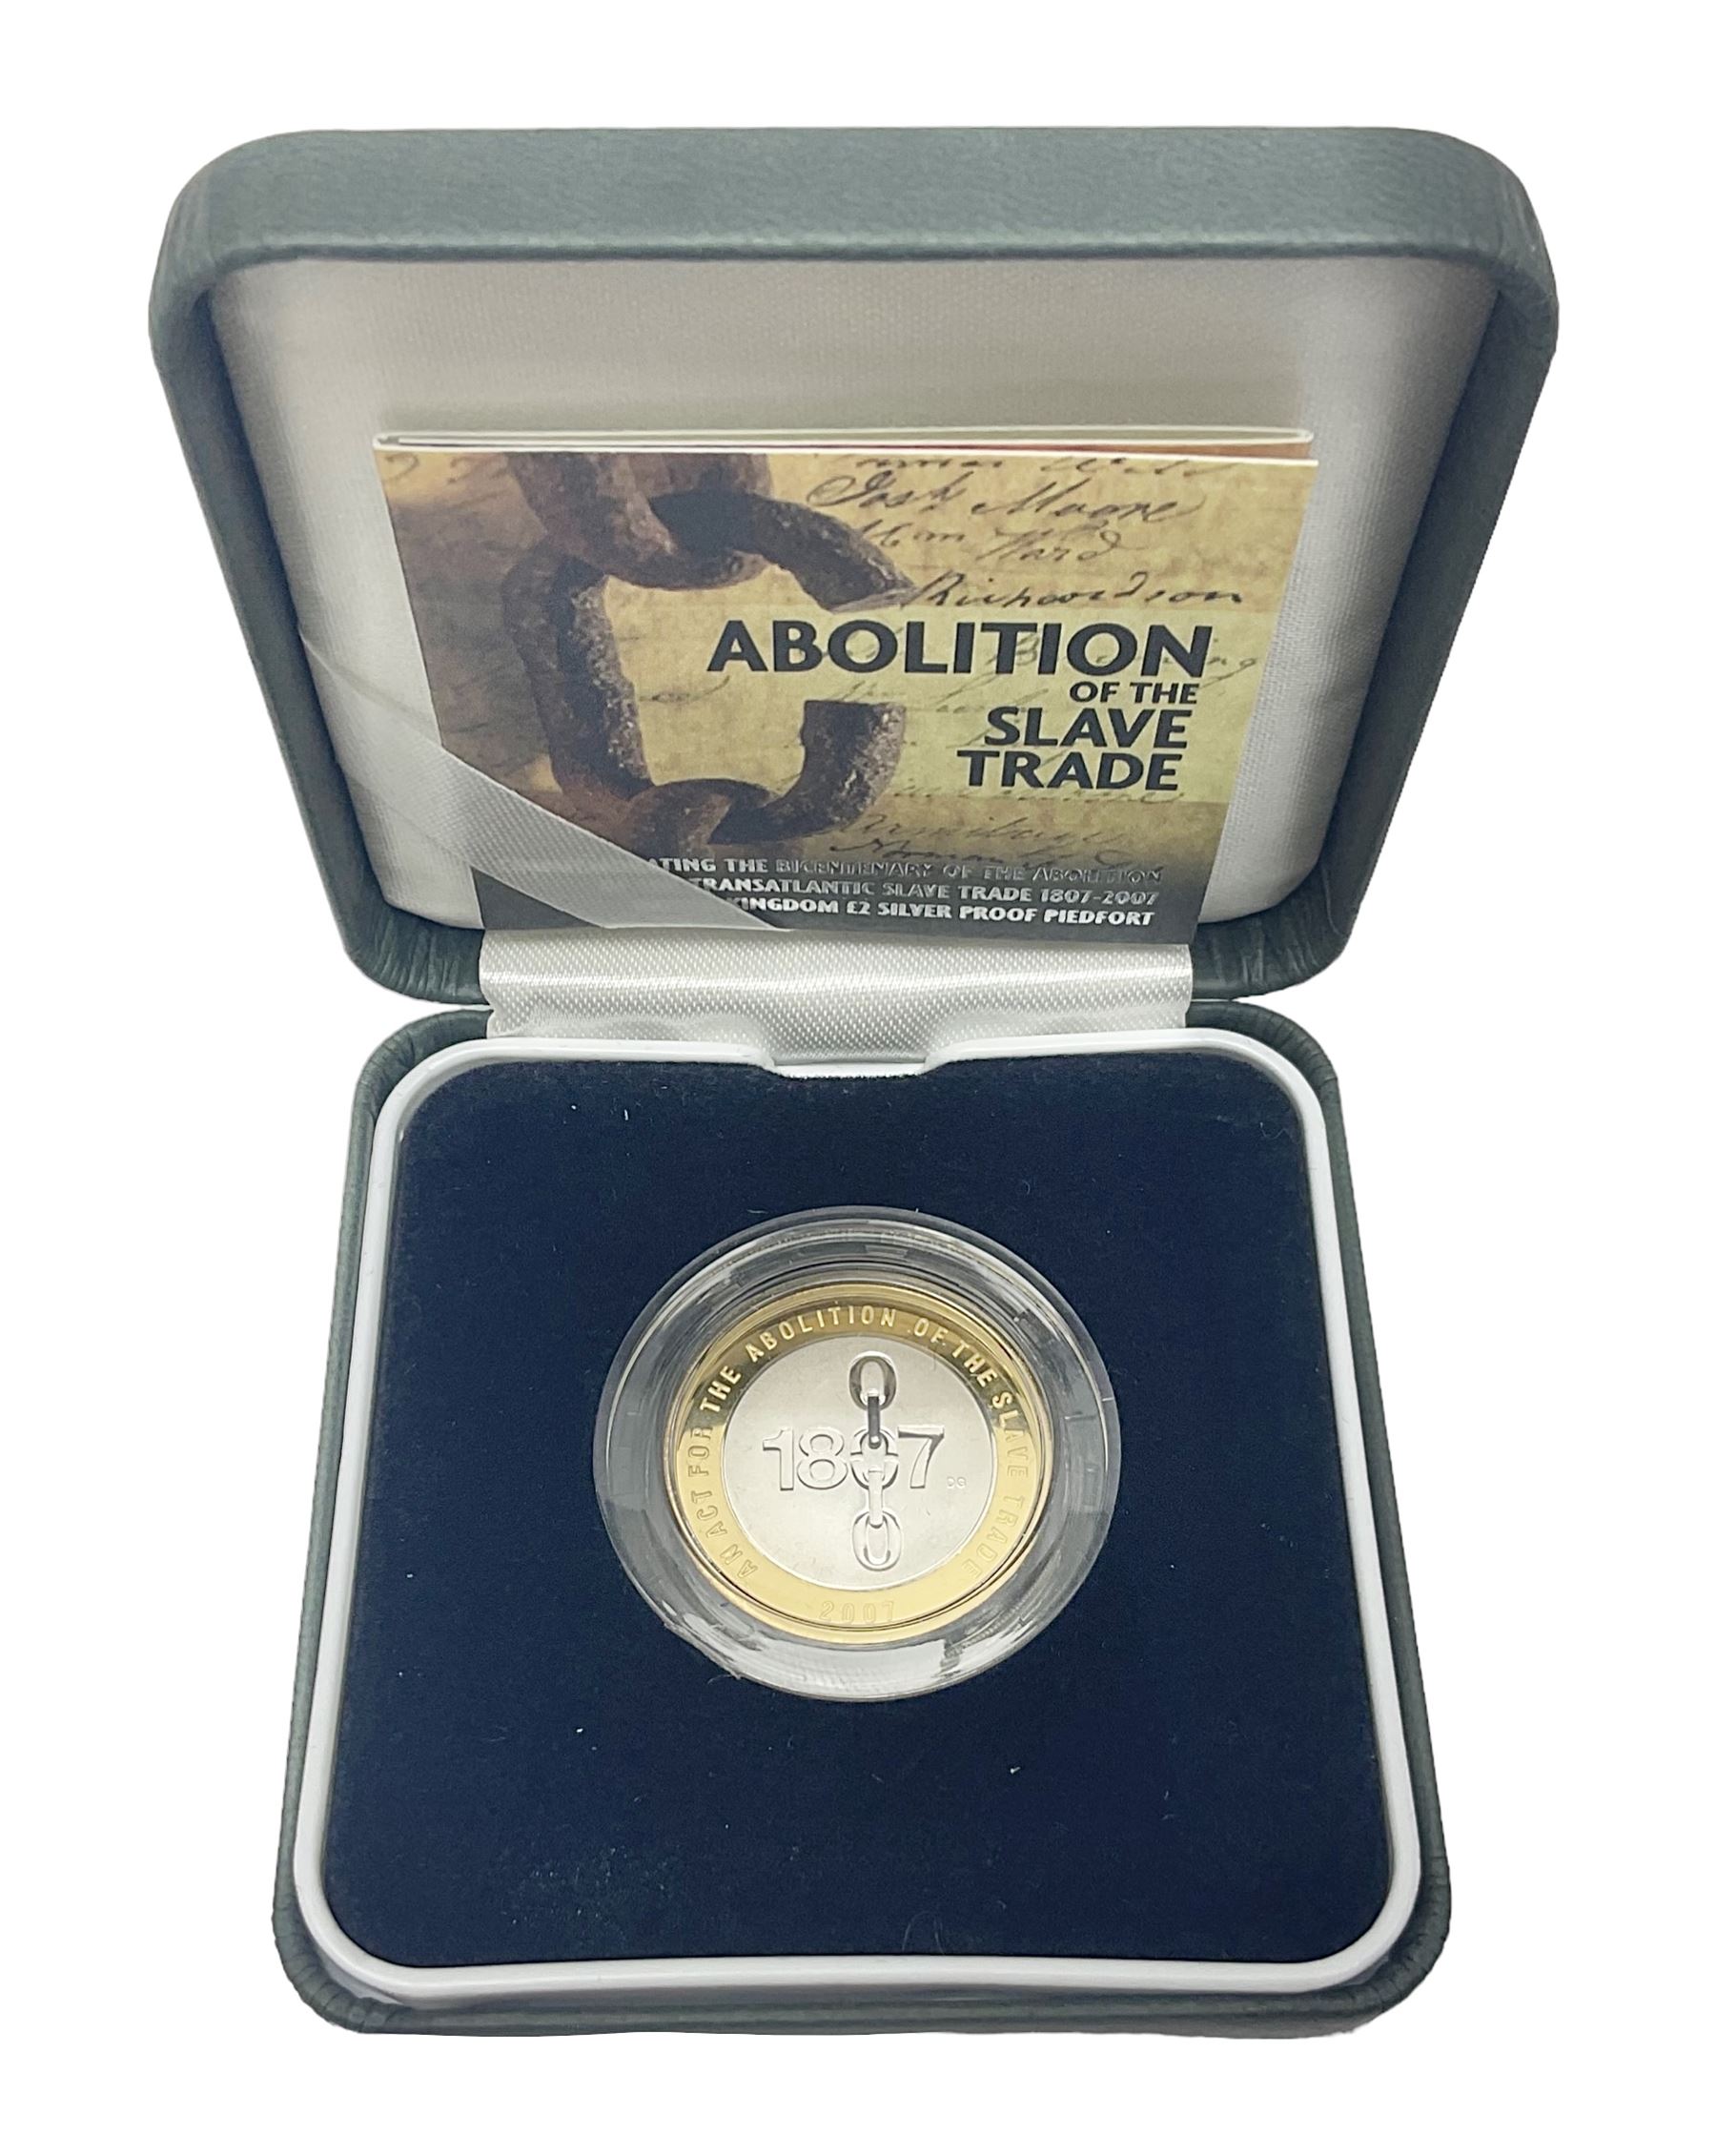 The Royal Mint United Kingdom 2007 'Abolition of the Slave Trade' silver proof piedfort two pound co